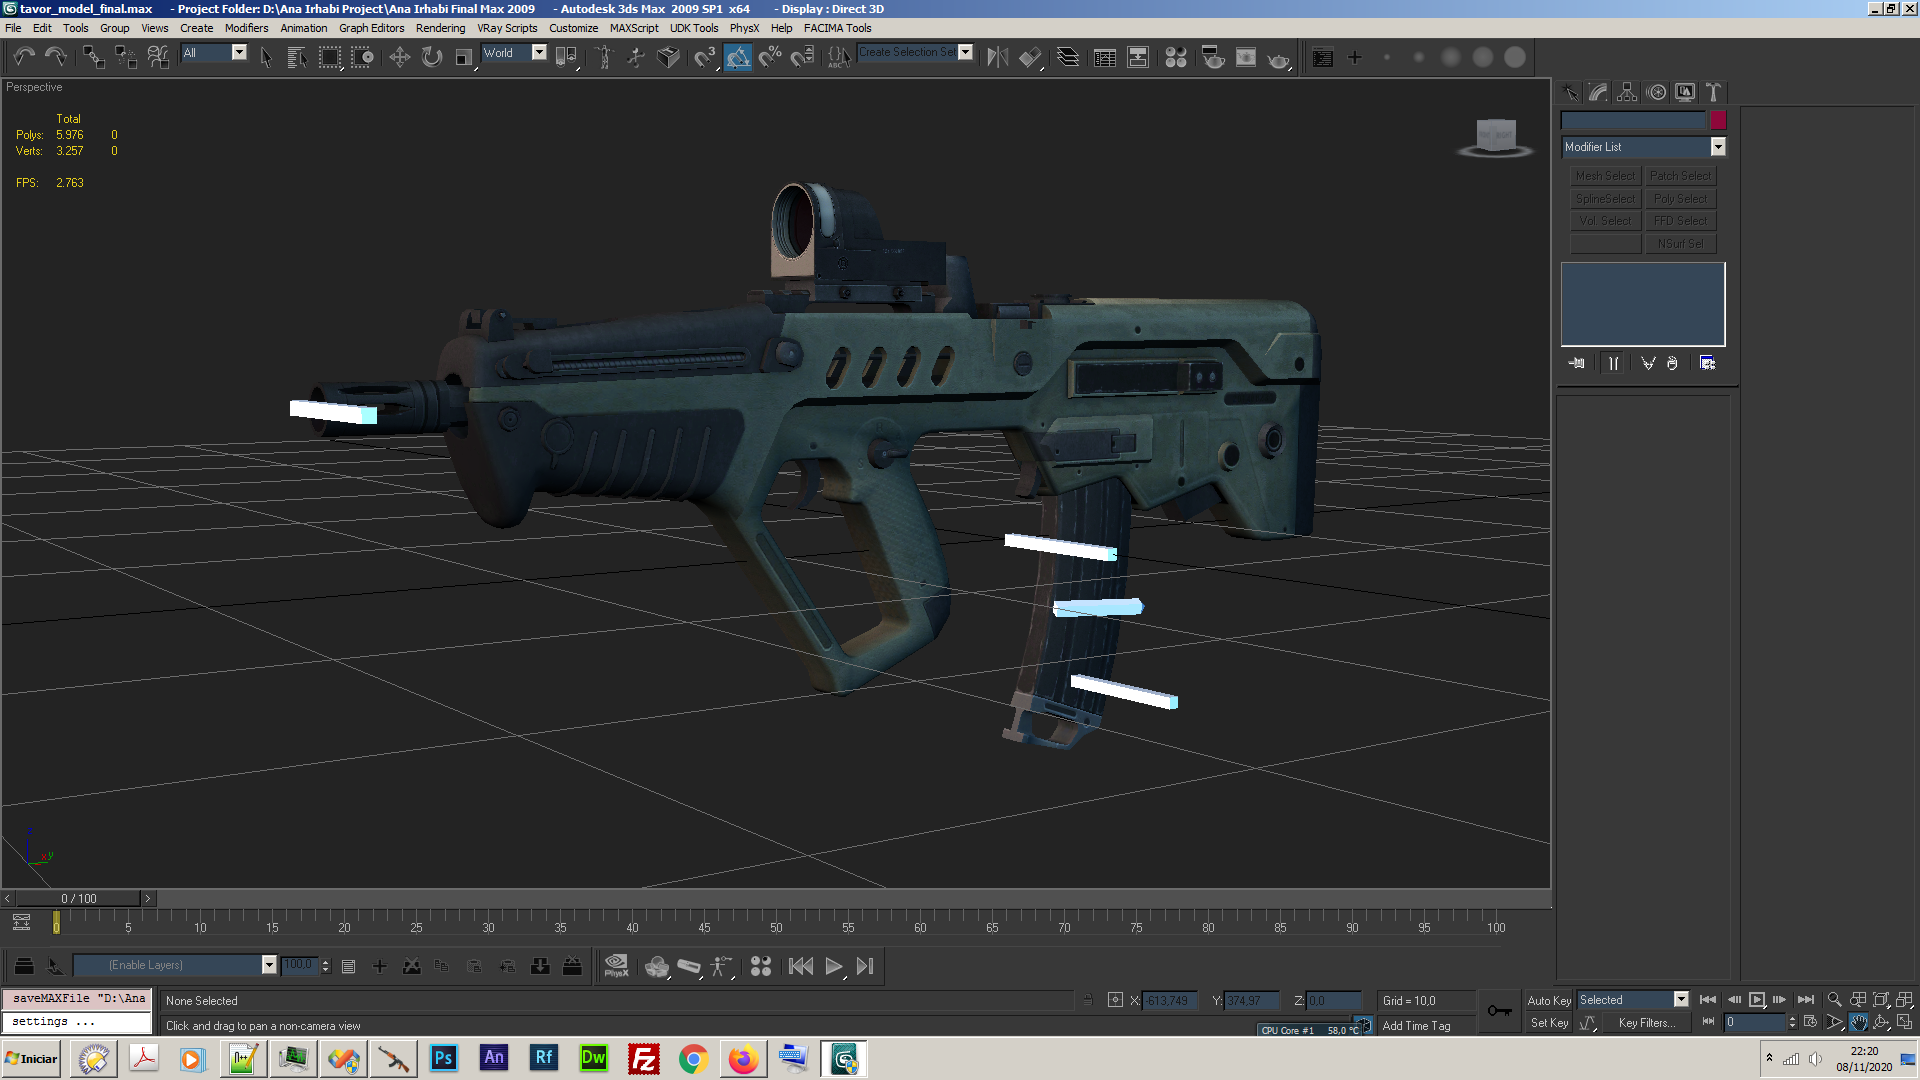 Tavor 1 1 - I am developing a game about Palestine Resistance